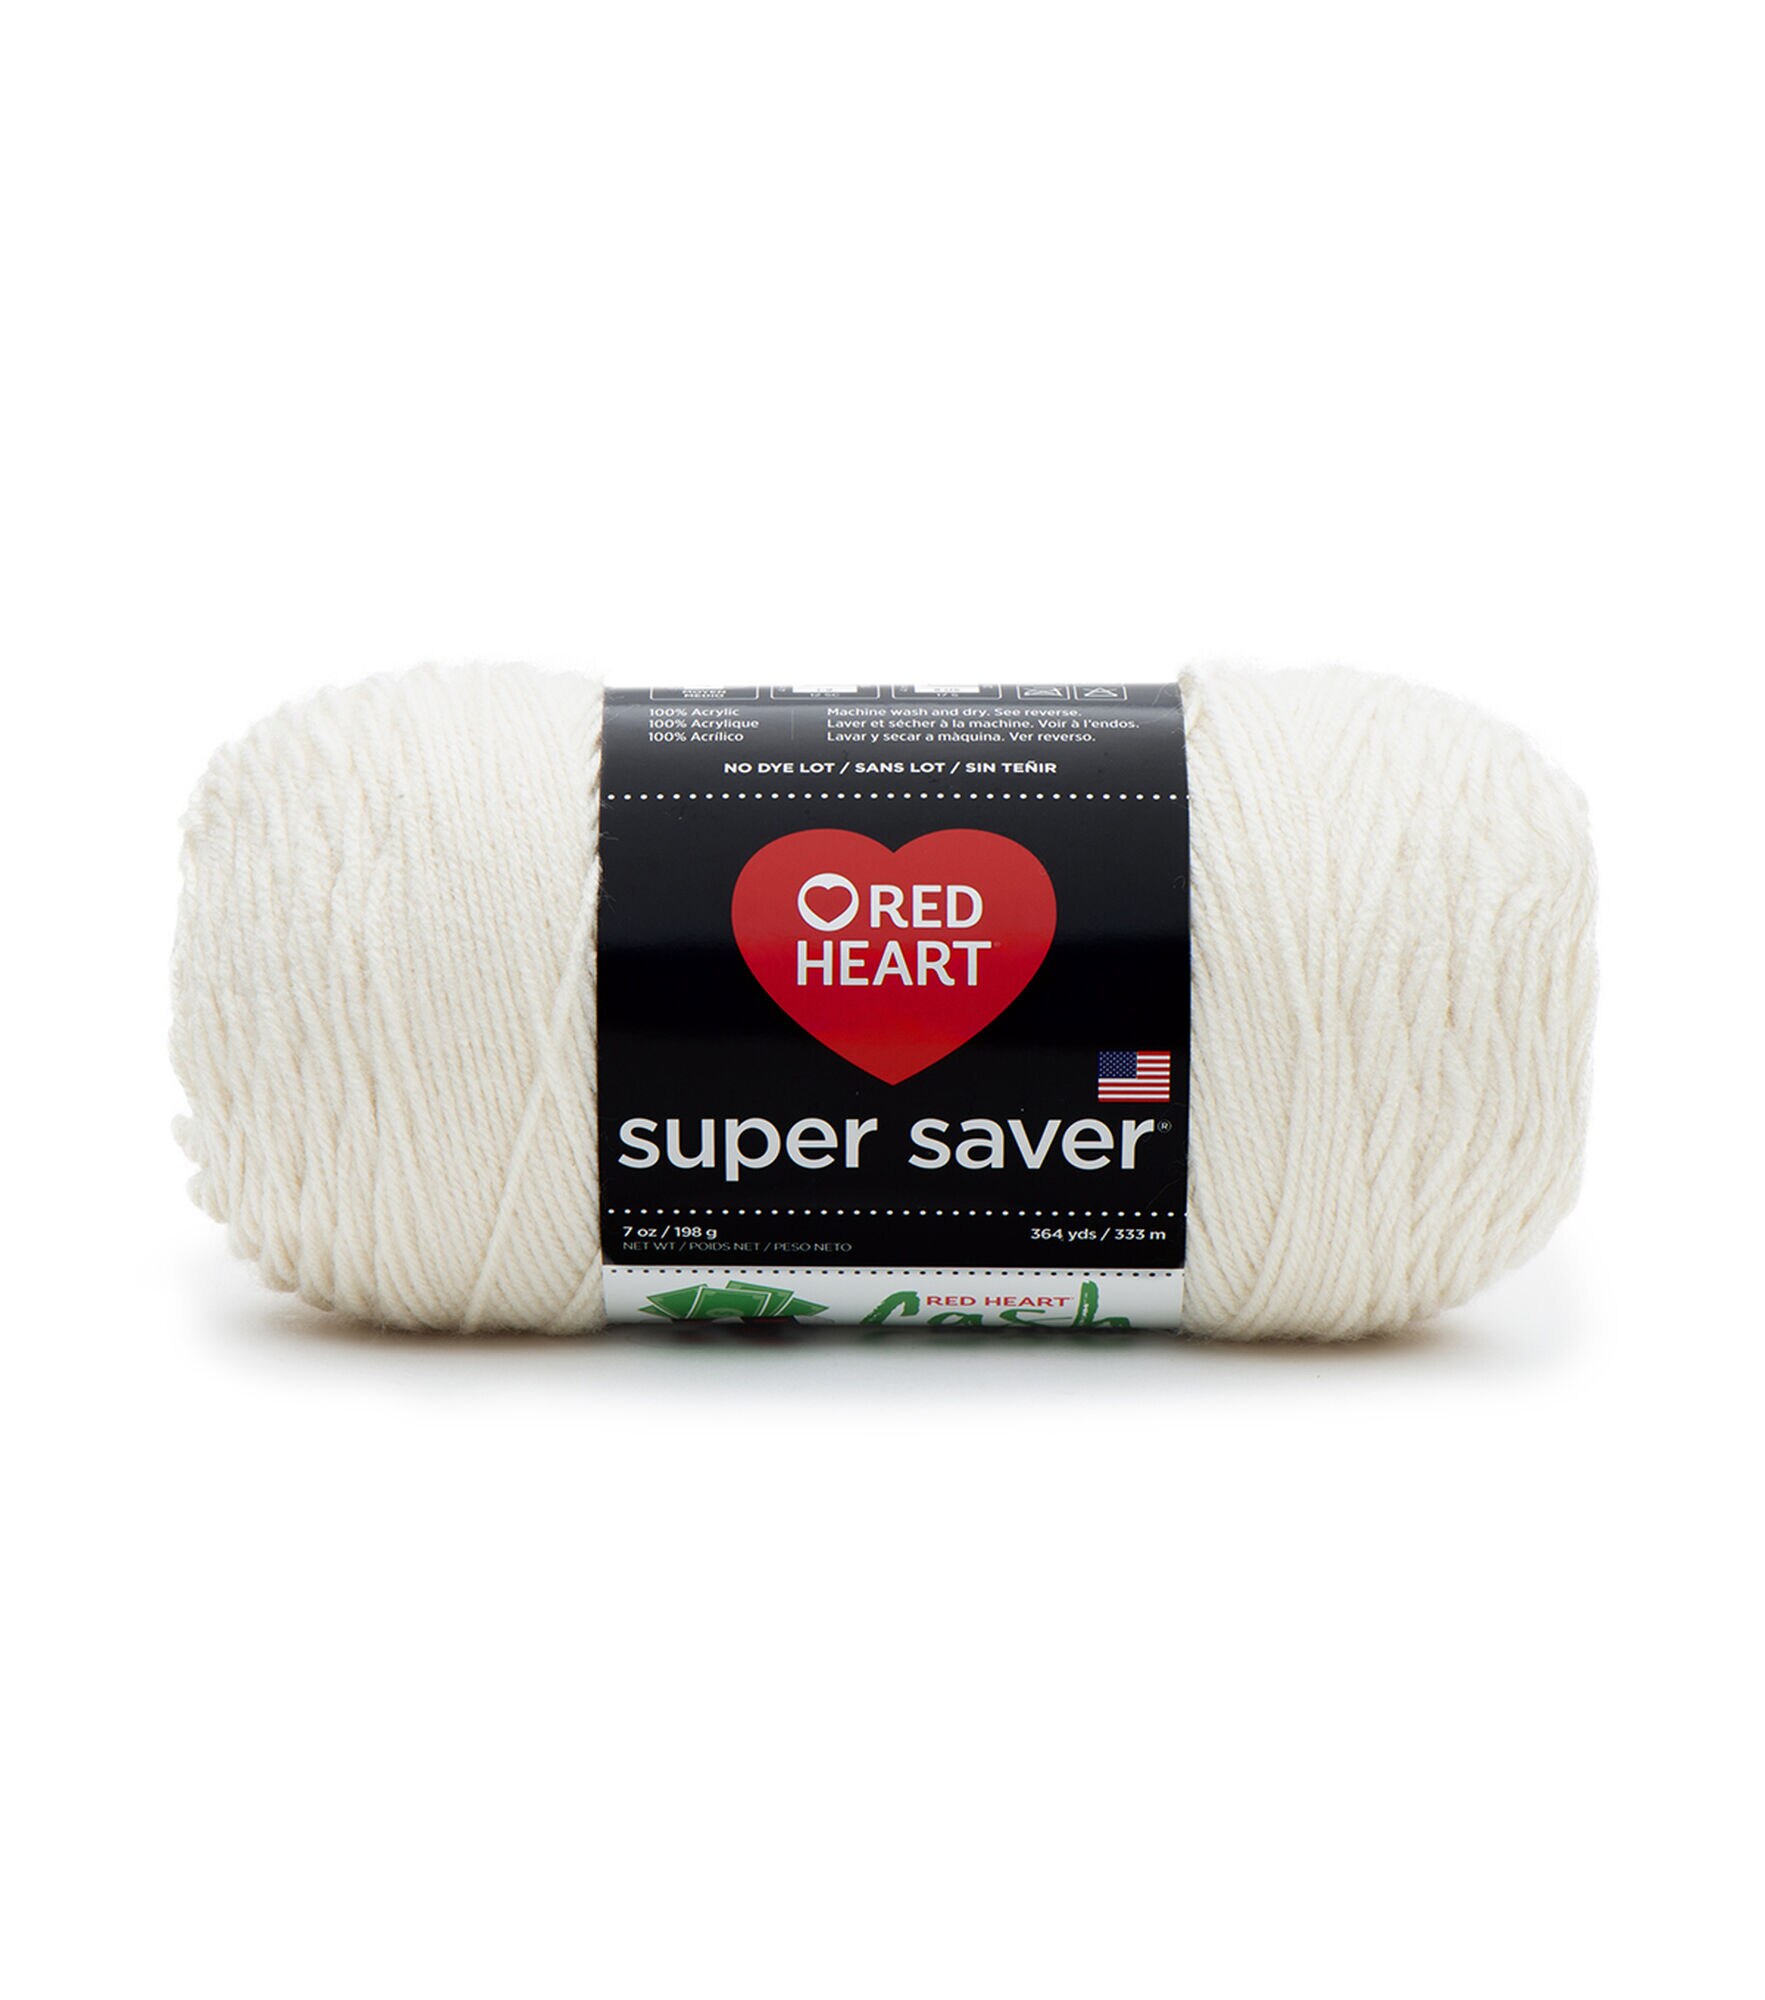 100% Pure Cotton Crochet Yarn by Threadart | GRAY | 50 gram Skeins |  Worsted Medium #4 Yarn | 85 yds per Skein - 30 Colors Available